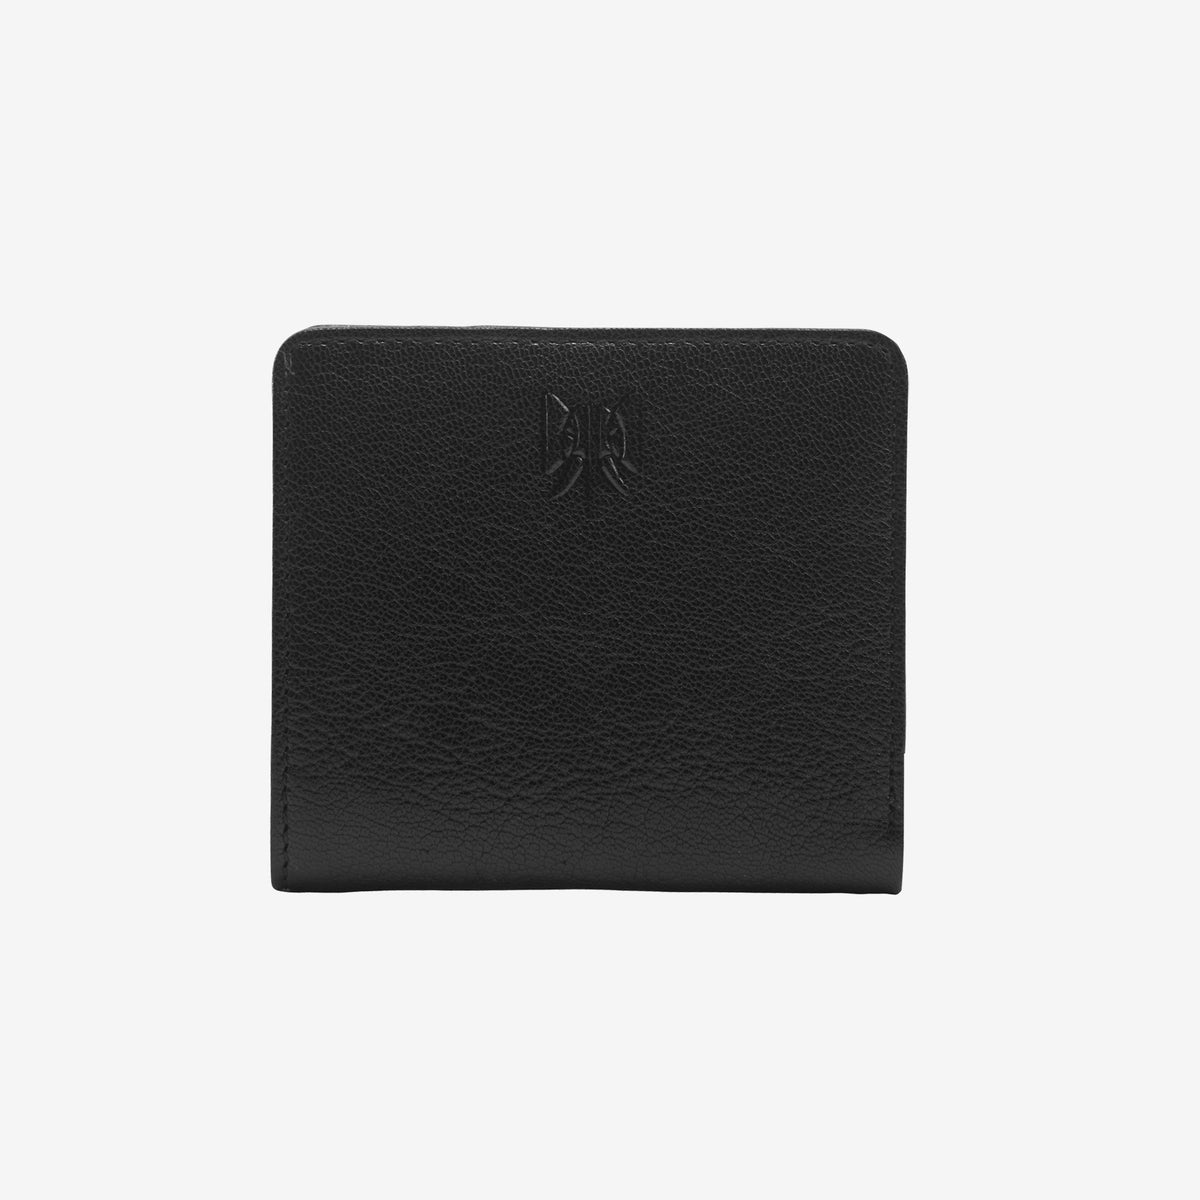 tusk-486-womens-siam-snap-evening-wallet-black-and-french-blue-front